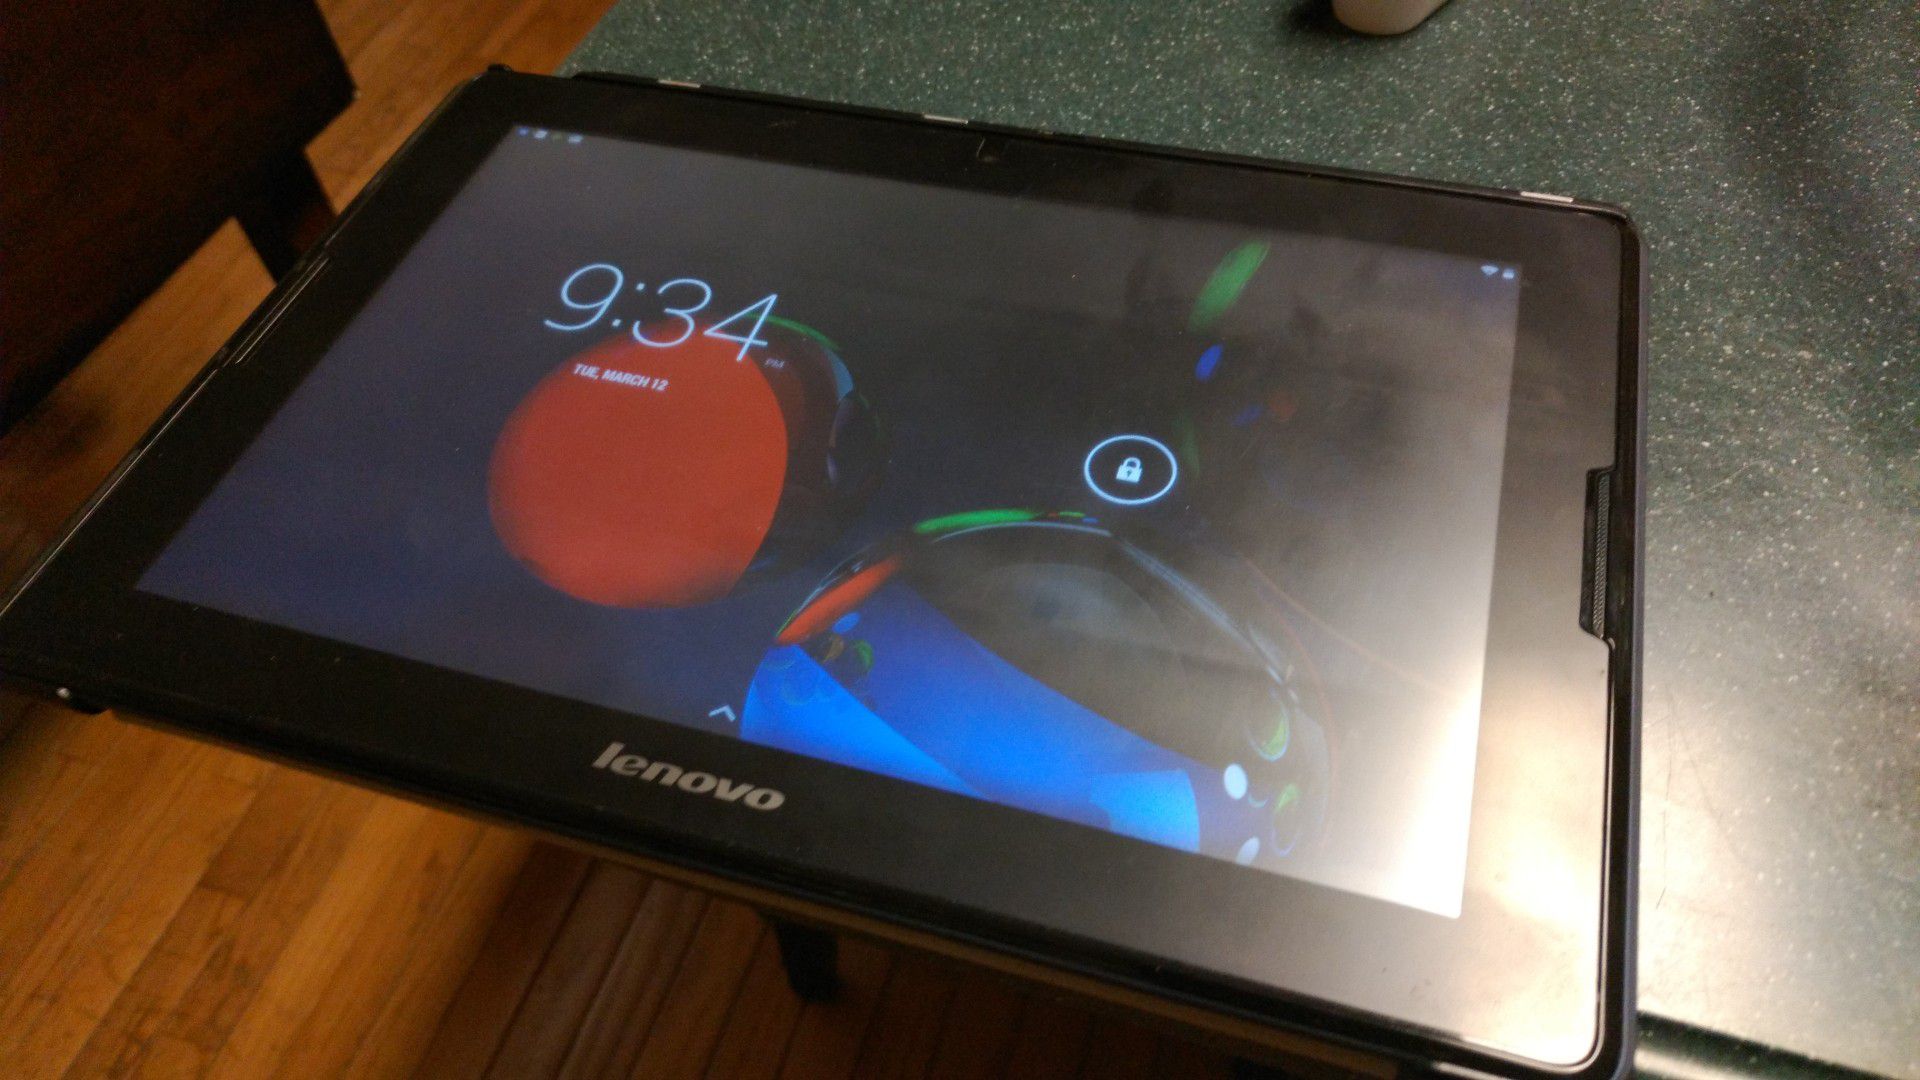 Lenovo Android Tablet - A7600-F